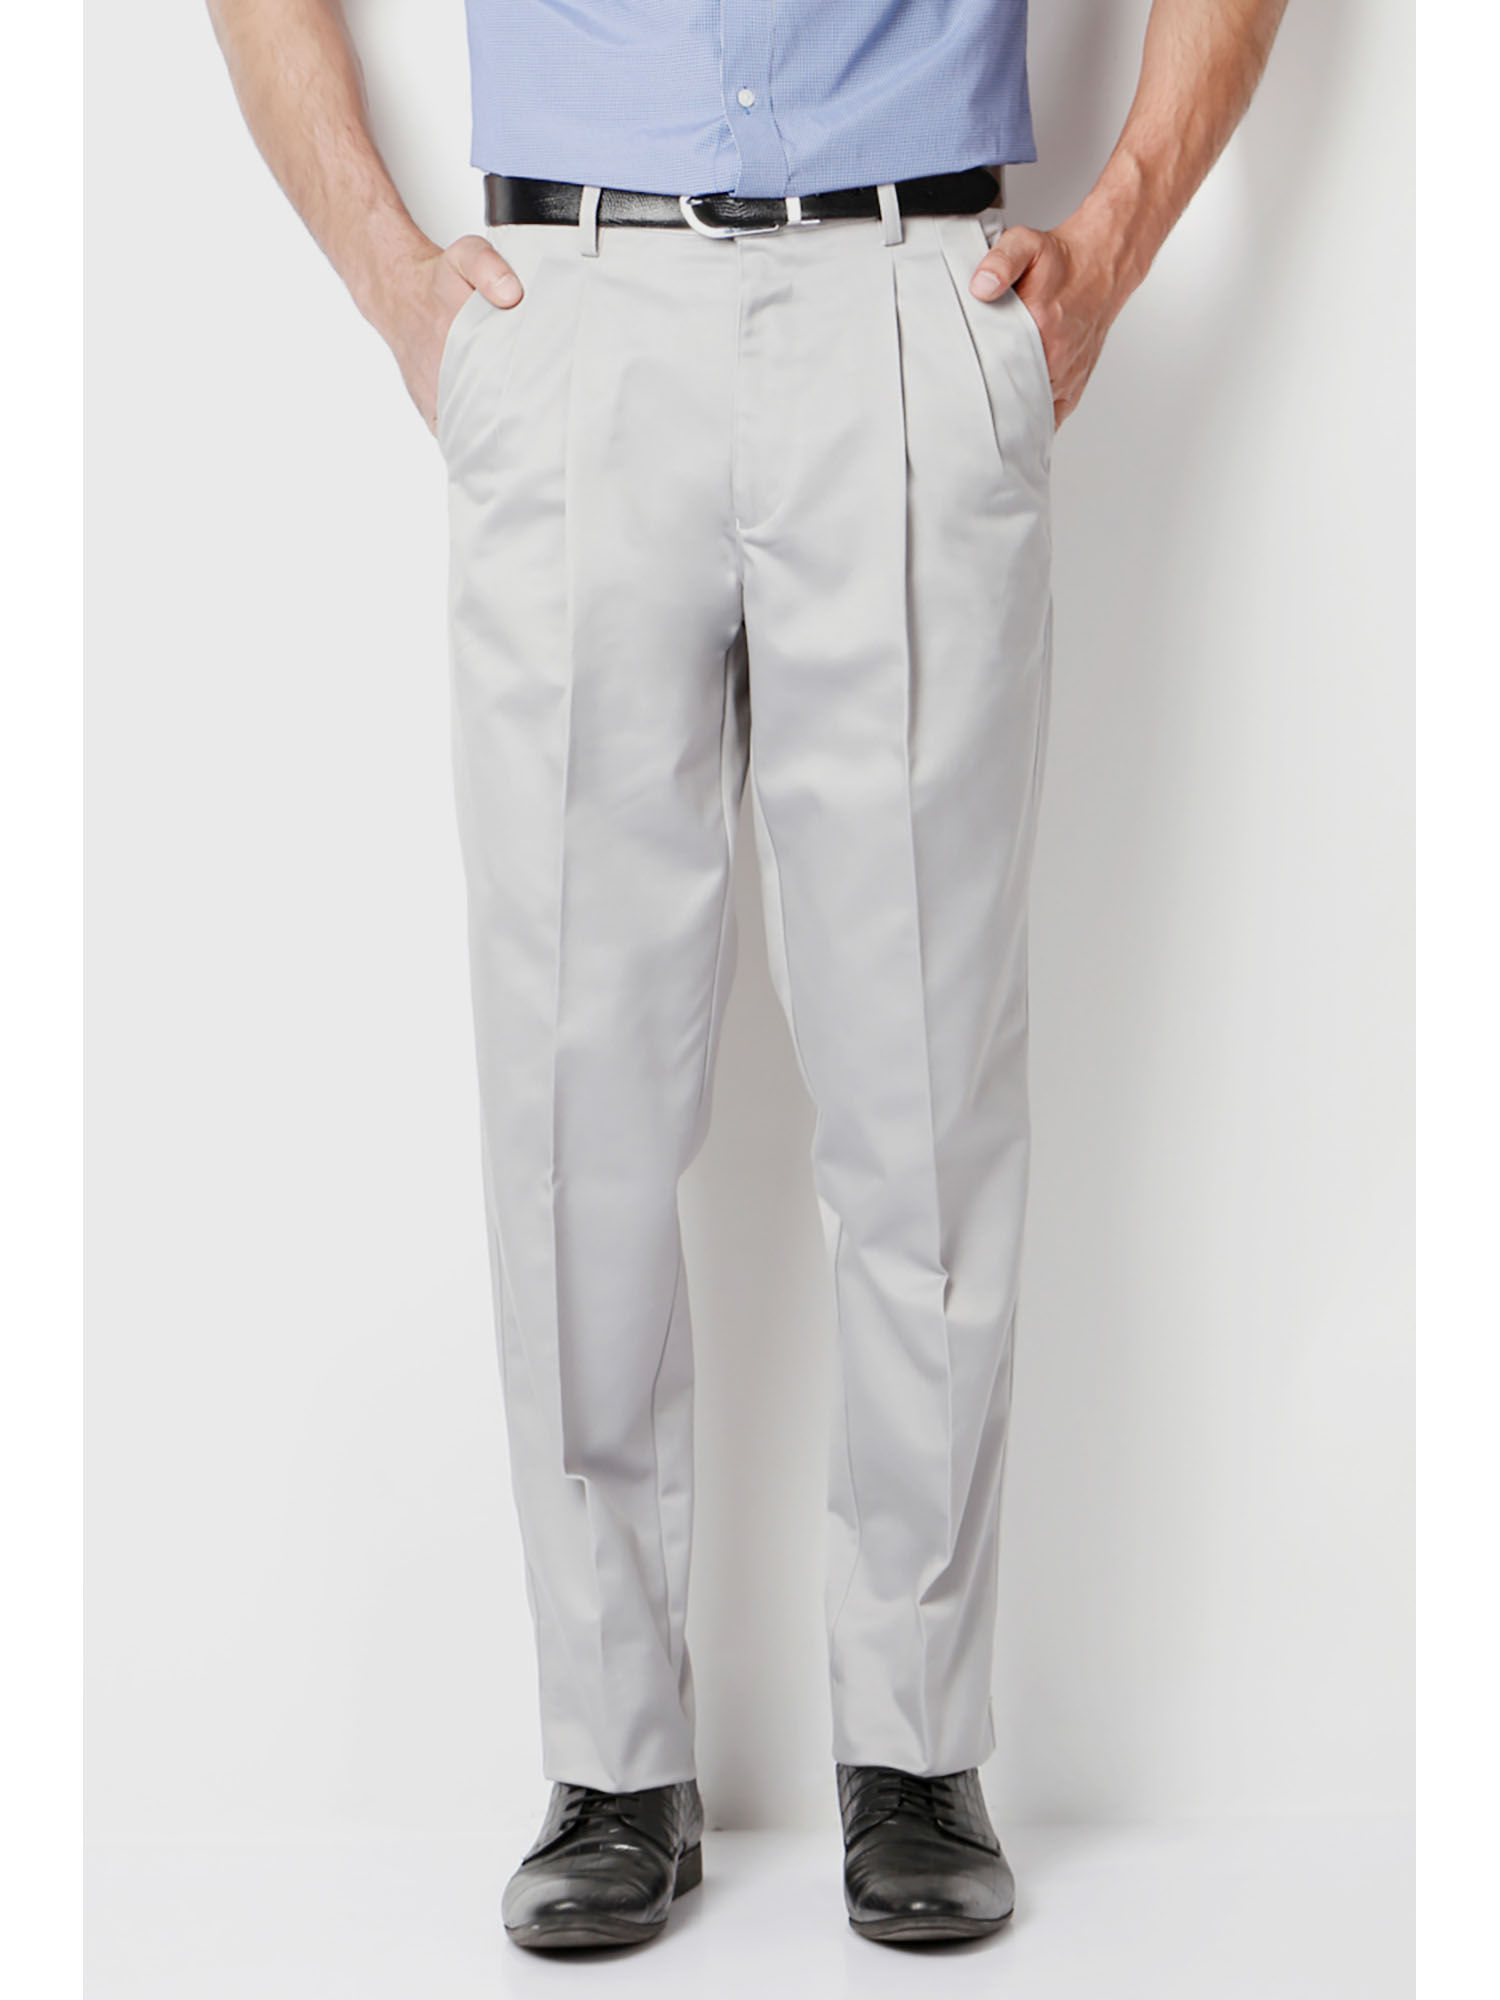 Peter England Trousers & Chinos, Peter England Grey Formal Trousers for Men  at Peterengland.com